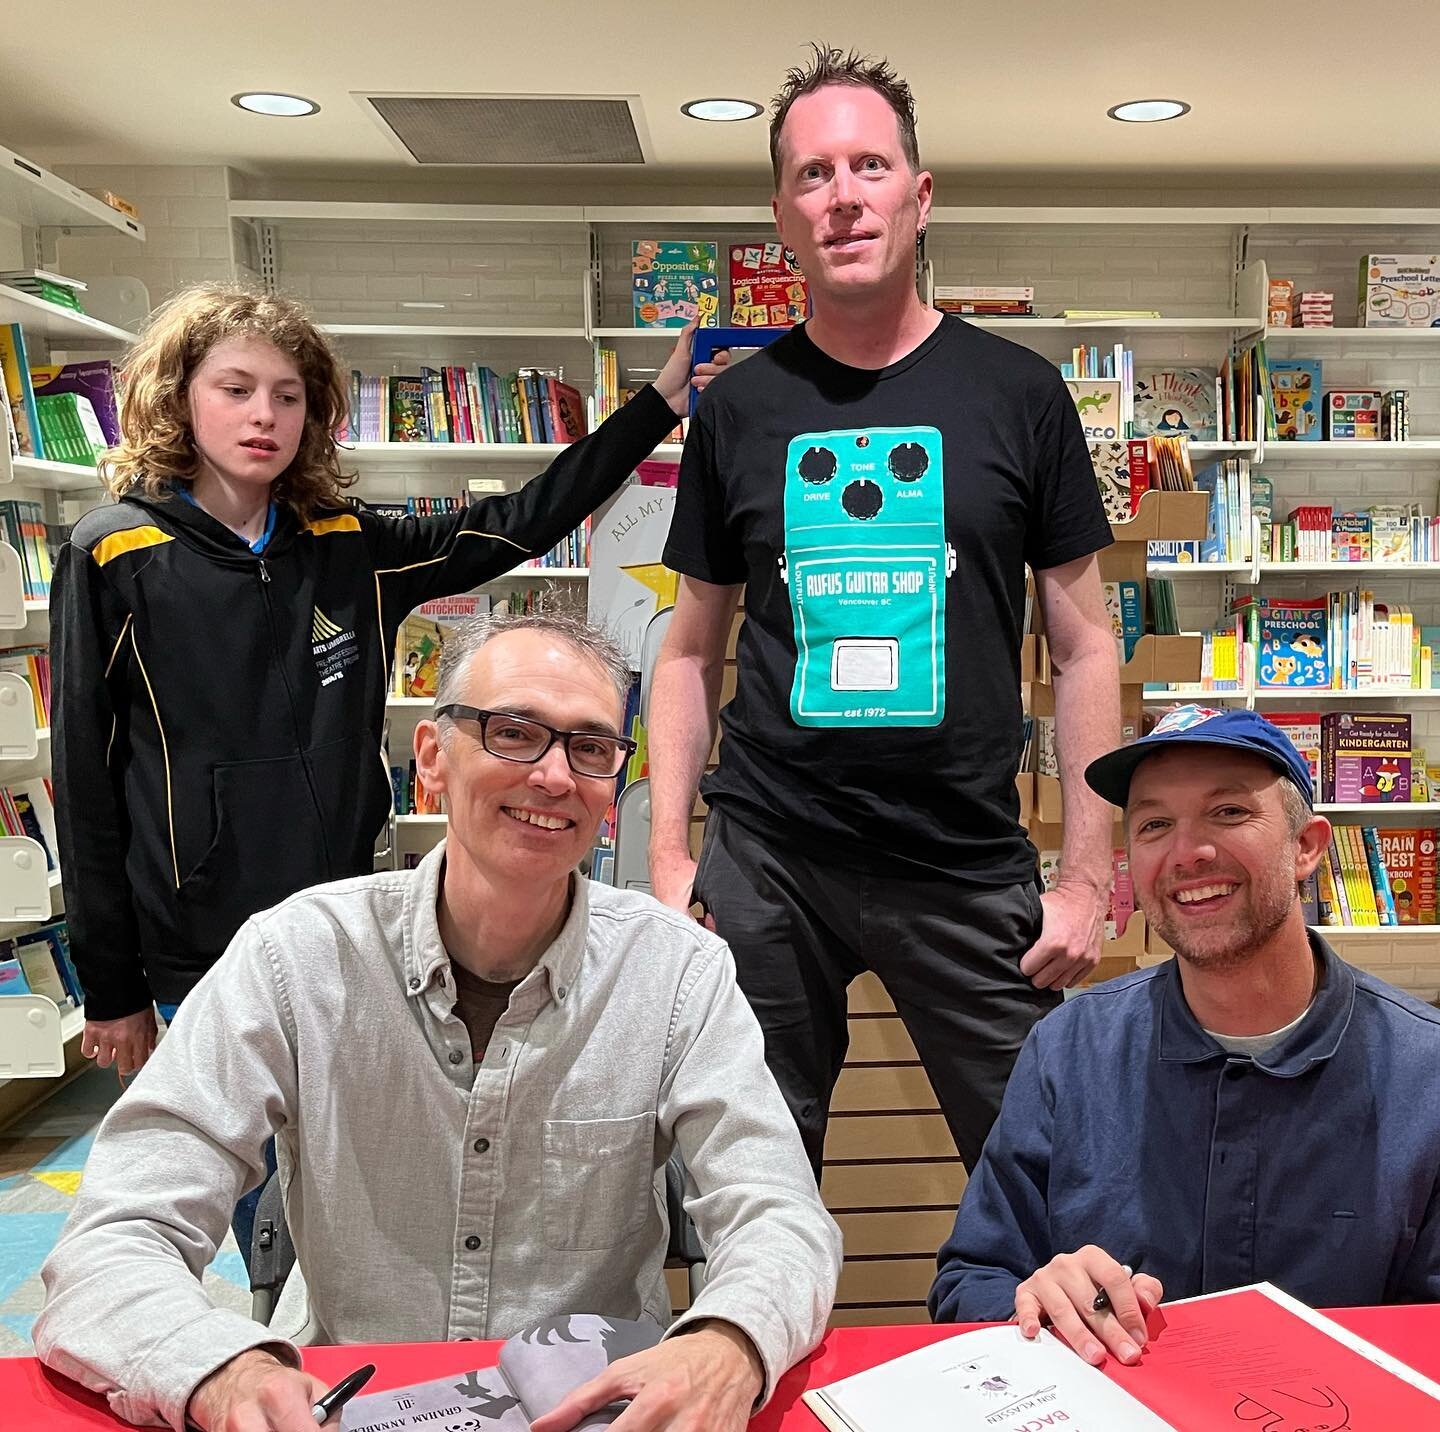 Theo and I met @grickle14 and @jonklassen last night at Kidsbooks. Fun evening! And a fun fact to share: Graham and I both had short stories in AdHouse Books&rsquo; &ldquo;Project: superior&rdquo; anthology many years ago. It was my very first profes